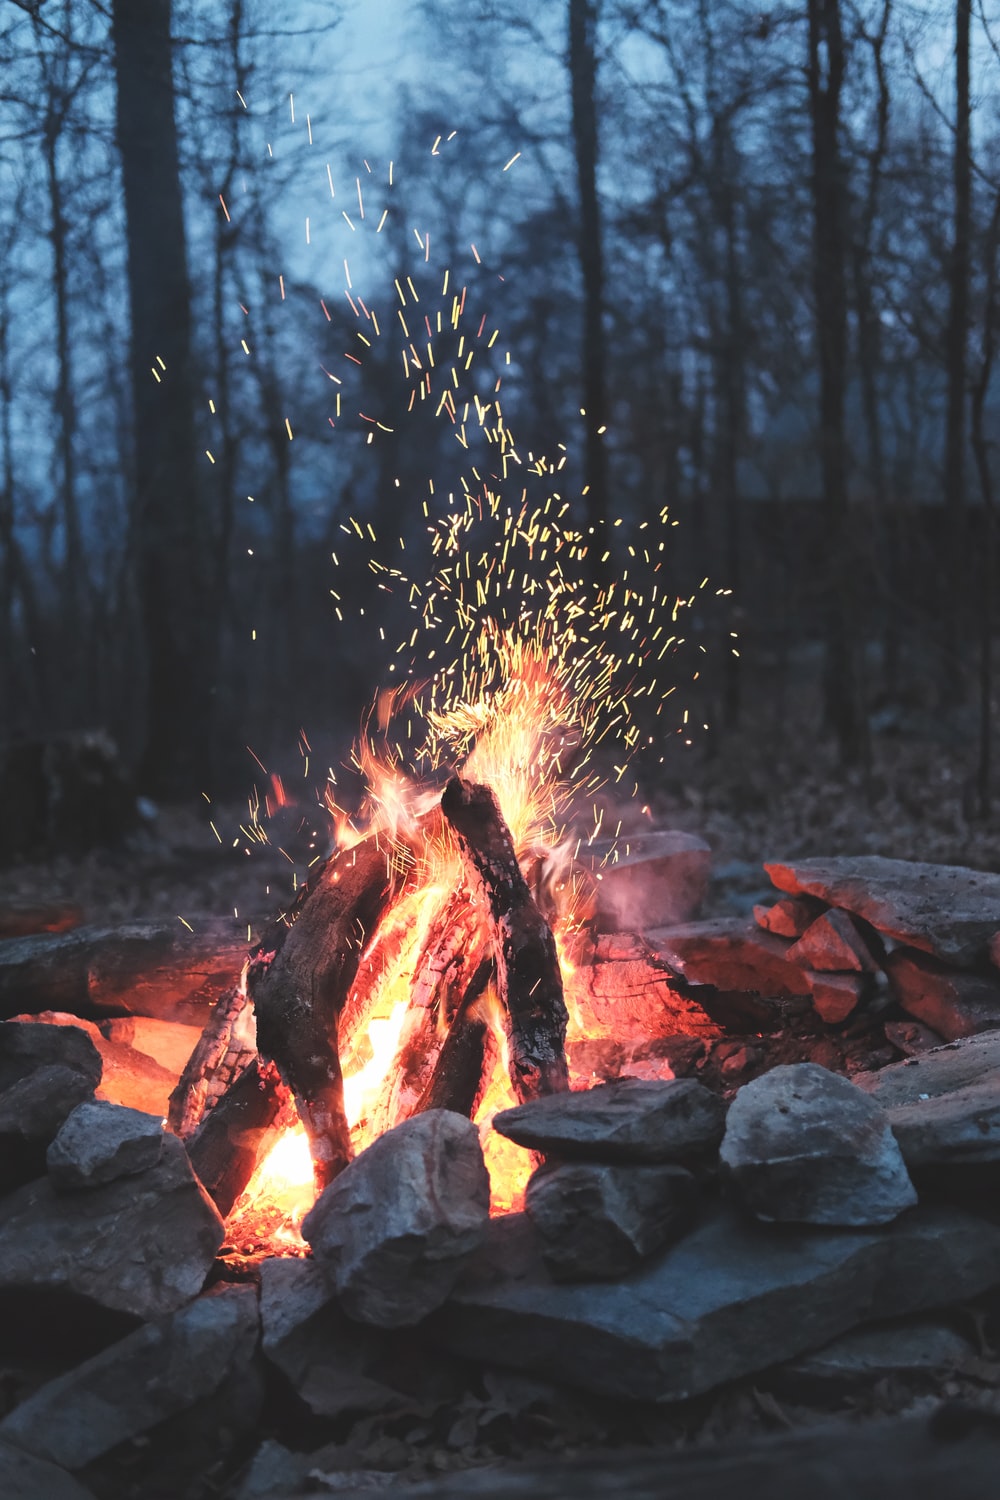 Camping Fire Picture. Download Free Image